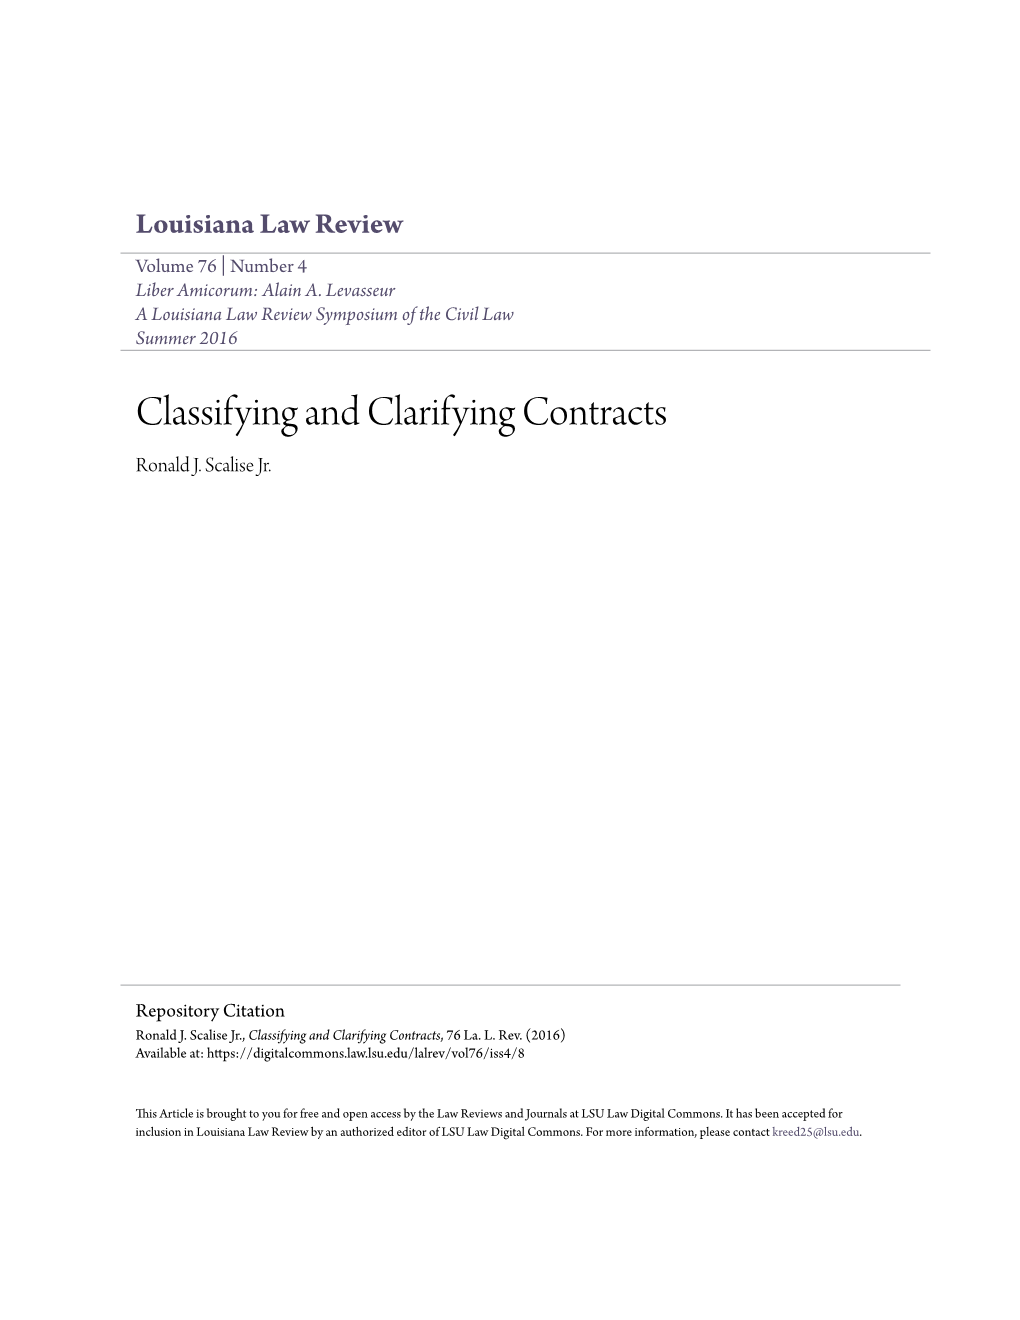 Classifying and Clarifying Contracts Ronald J